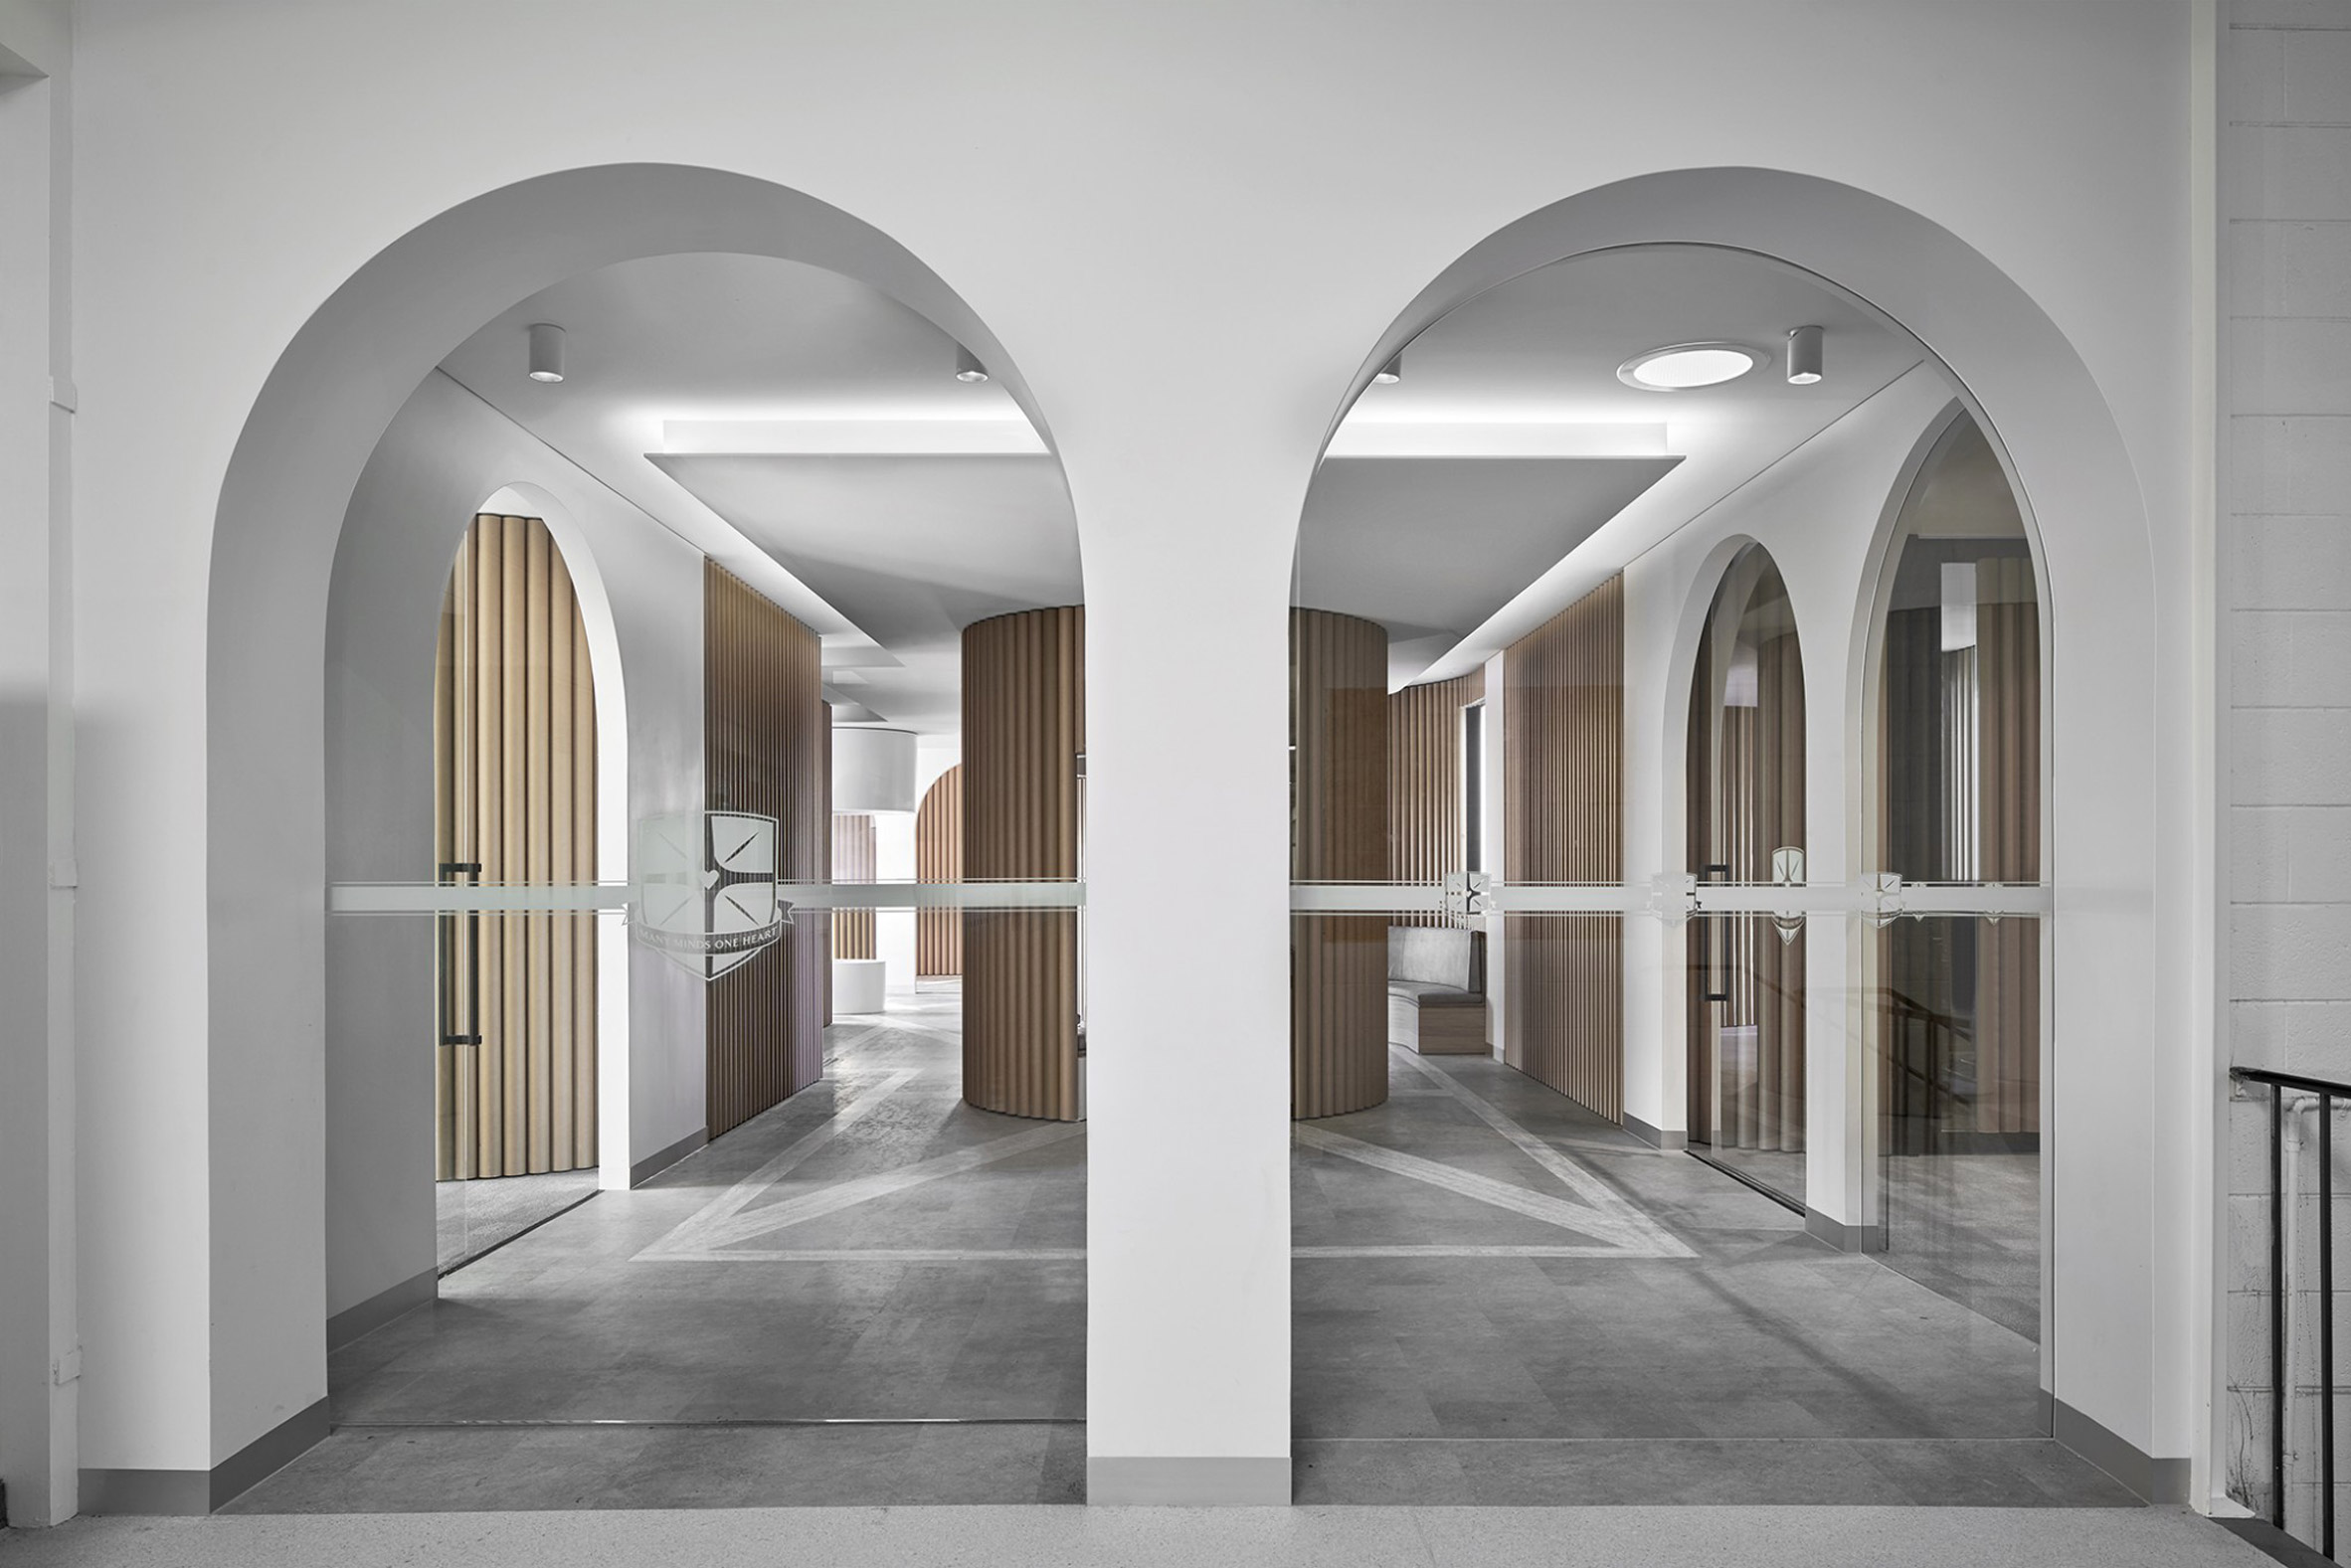 Piazza Dell’Ufficio by Branch Studio Architects also won small workspace of the year